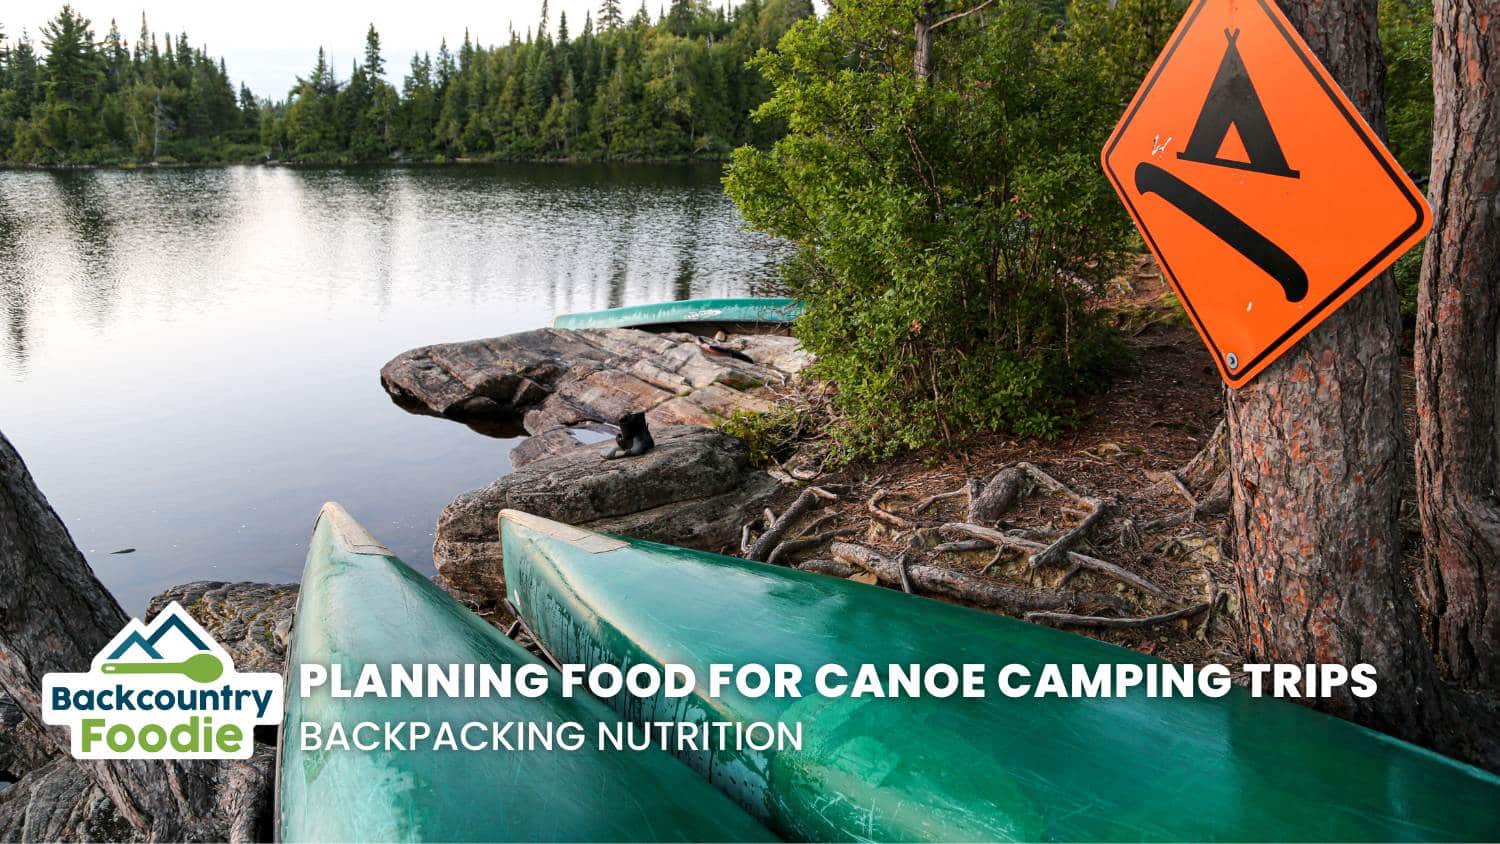 Backcountry Foodie How to Plan Food for Canoe Camping Trips blog thumbnail image